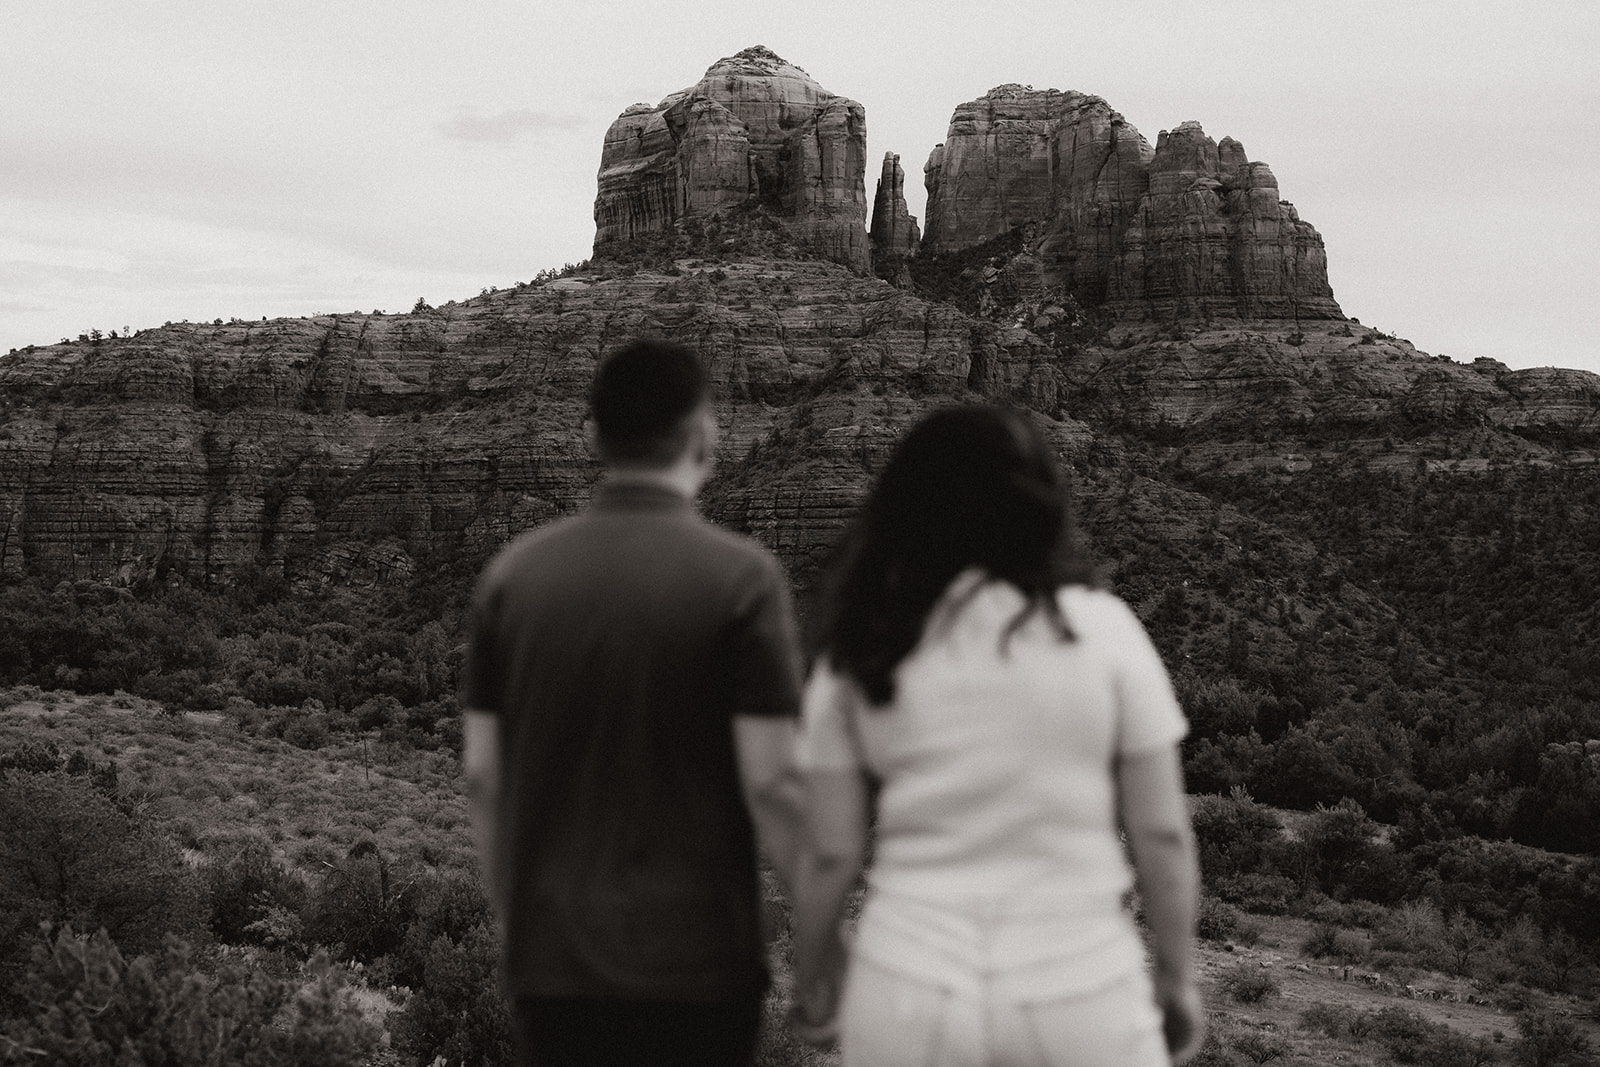 Stunning couple pose together during their beautiful Sedona engagement photoshoot with the Arizona nature in the background